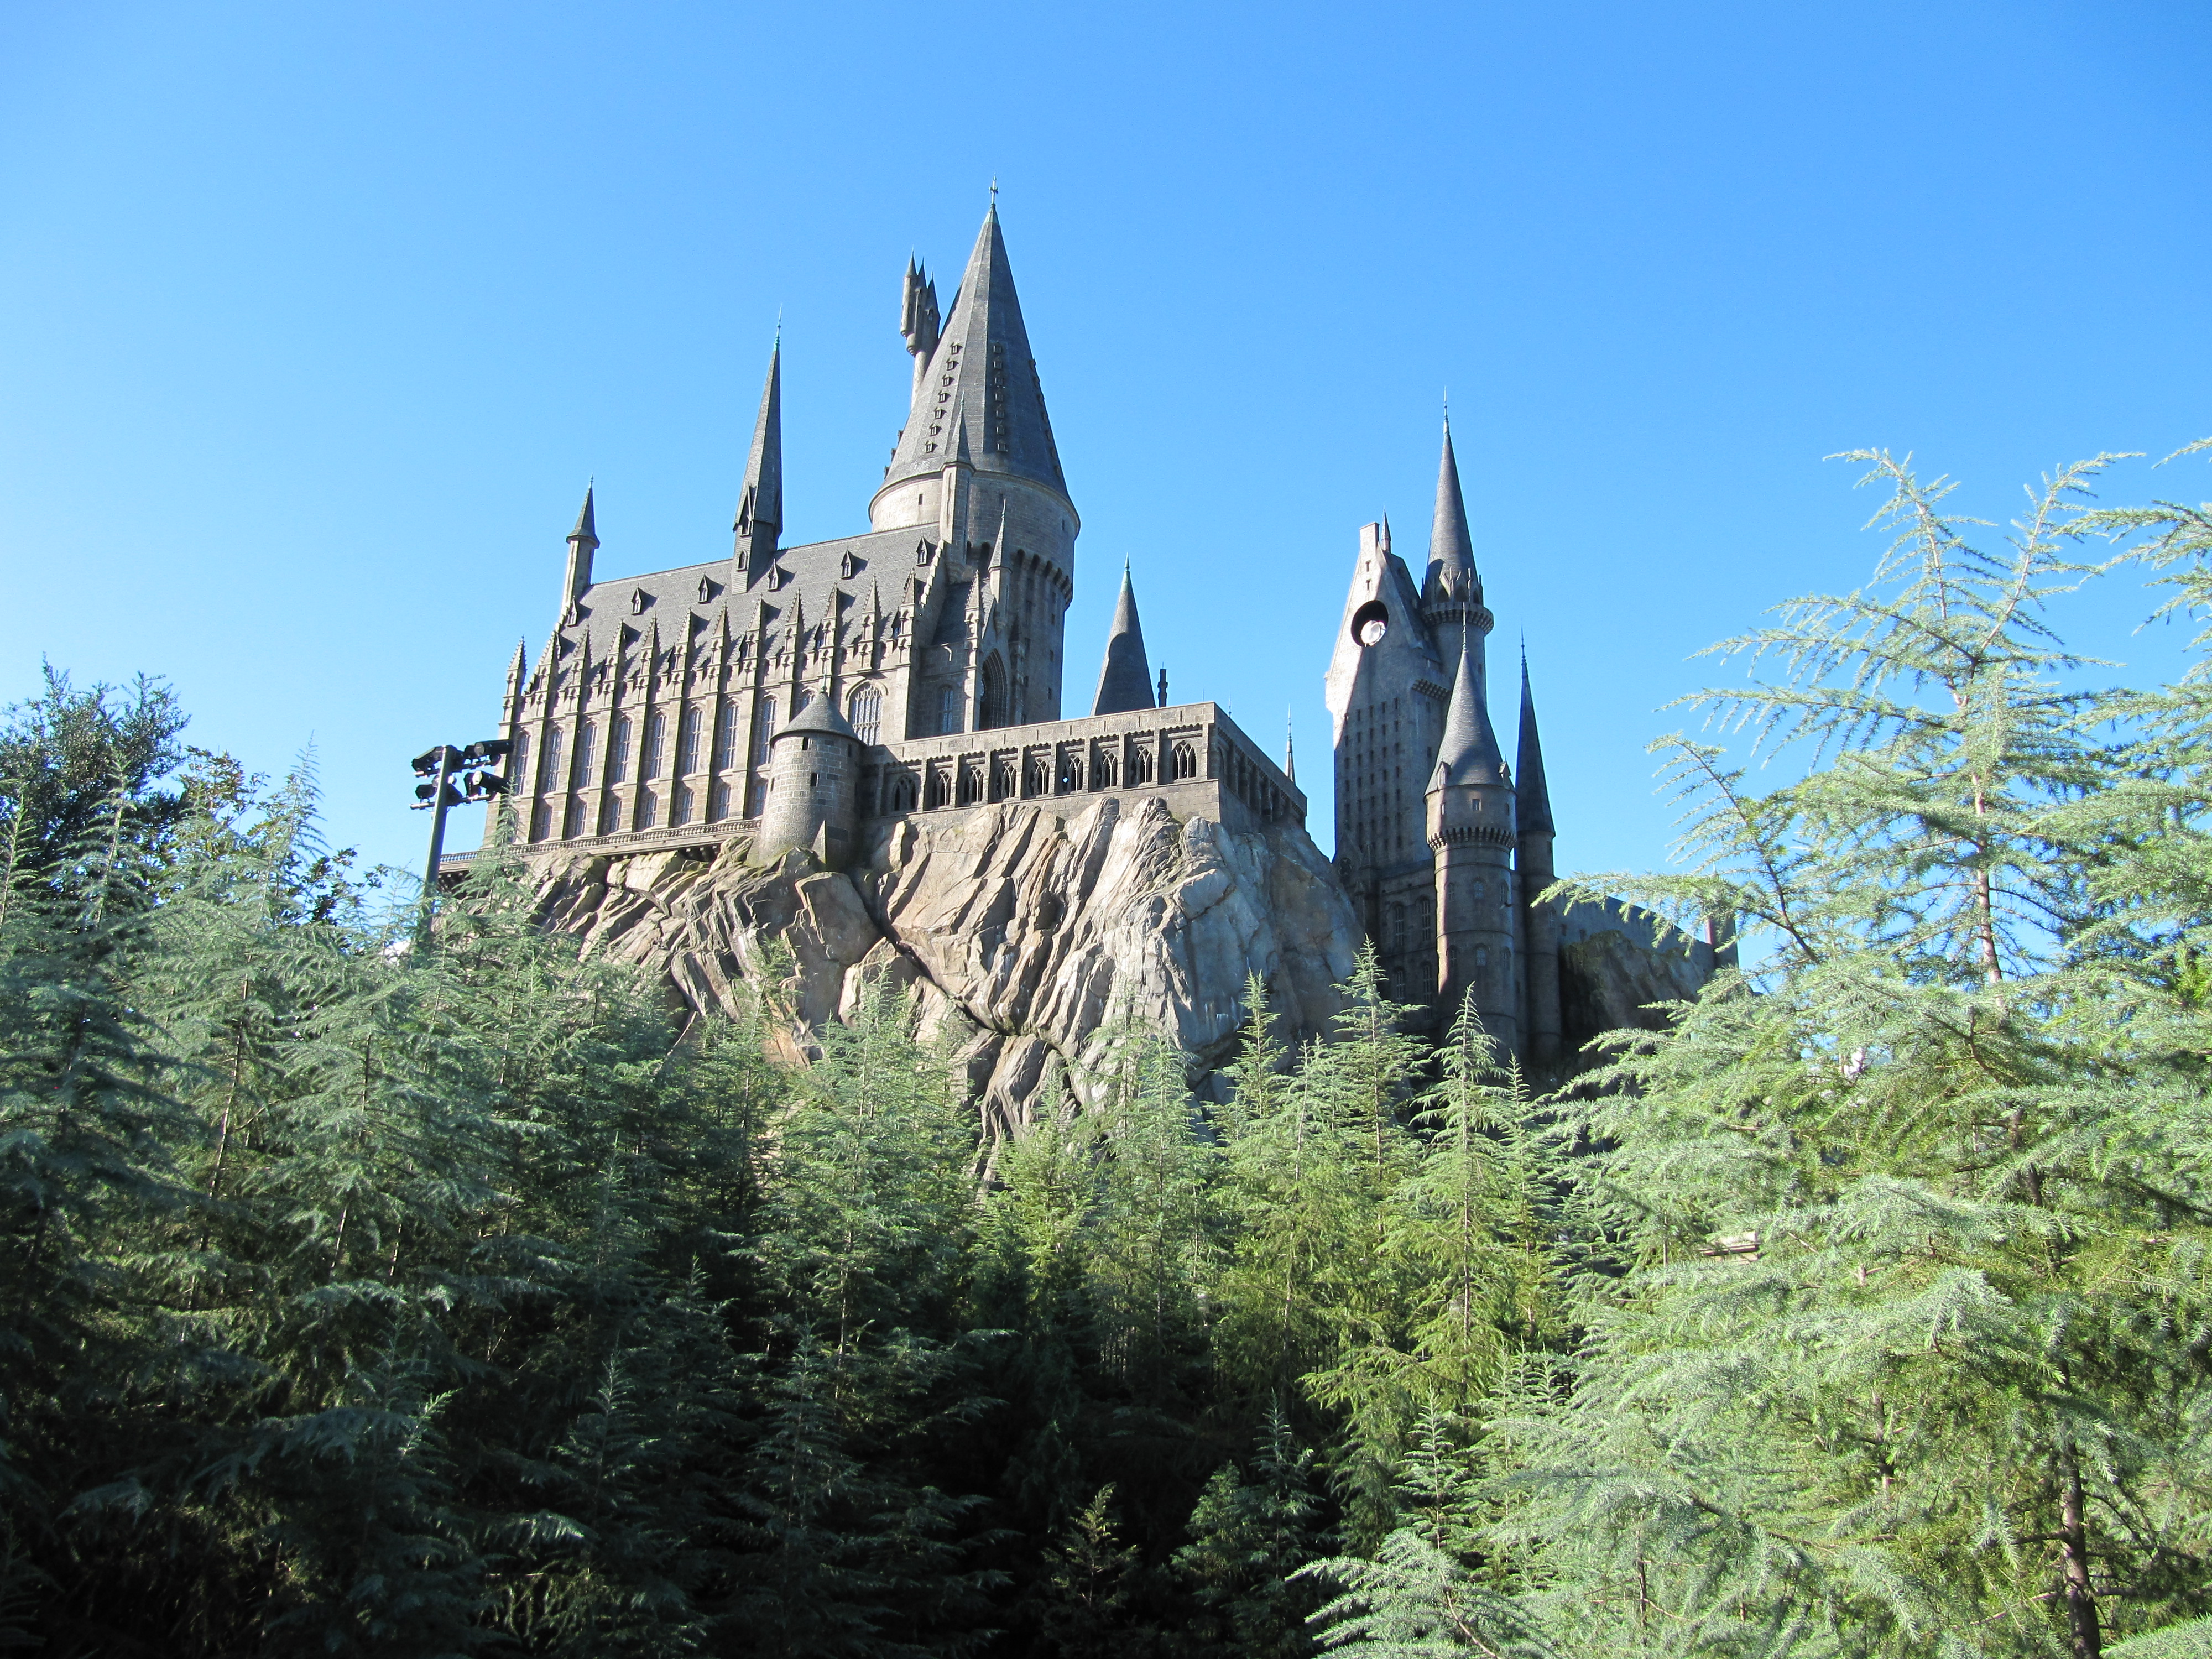 The Wizarding World of Harry Potter adds new adventures to Universal Studios – Orlando